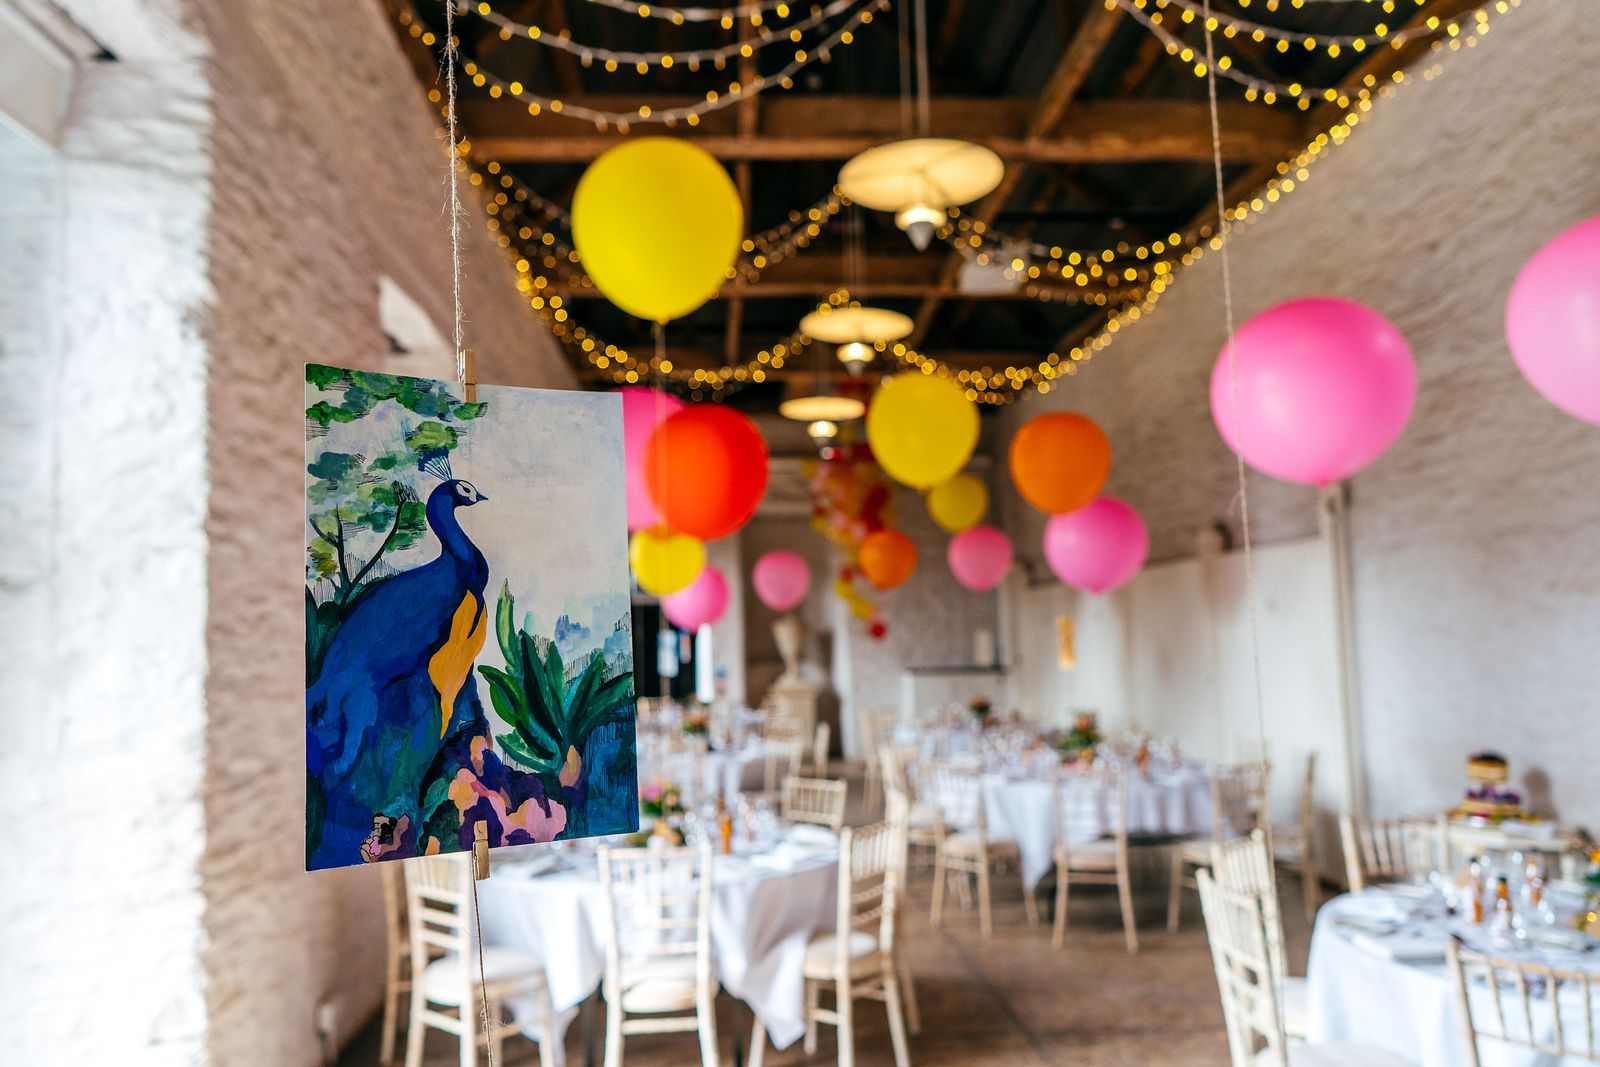 Balloons fill the reception space at this country house wedding in Somerset